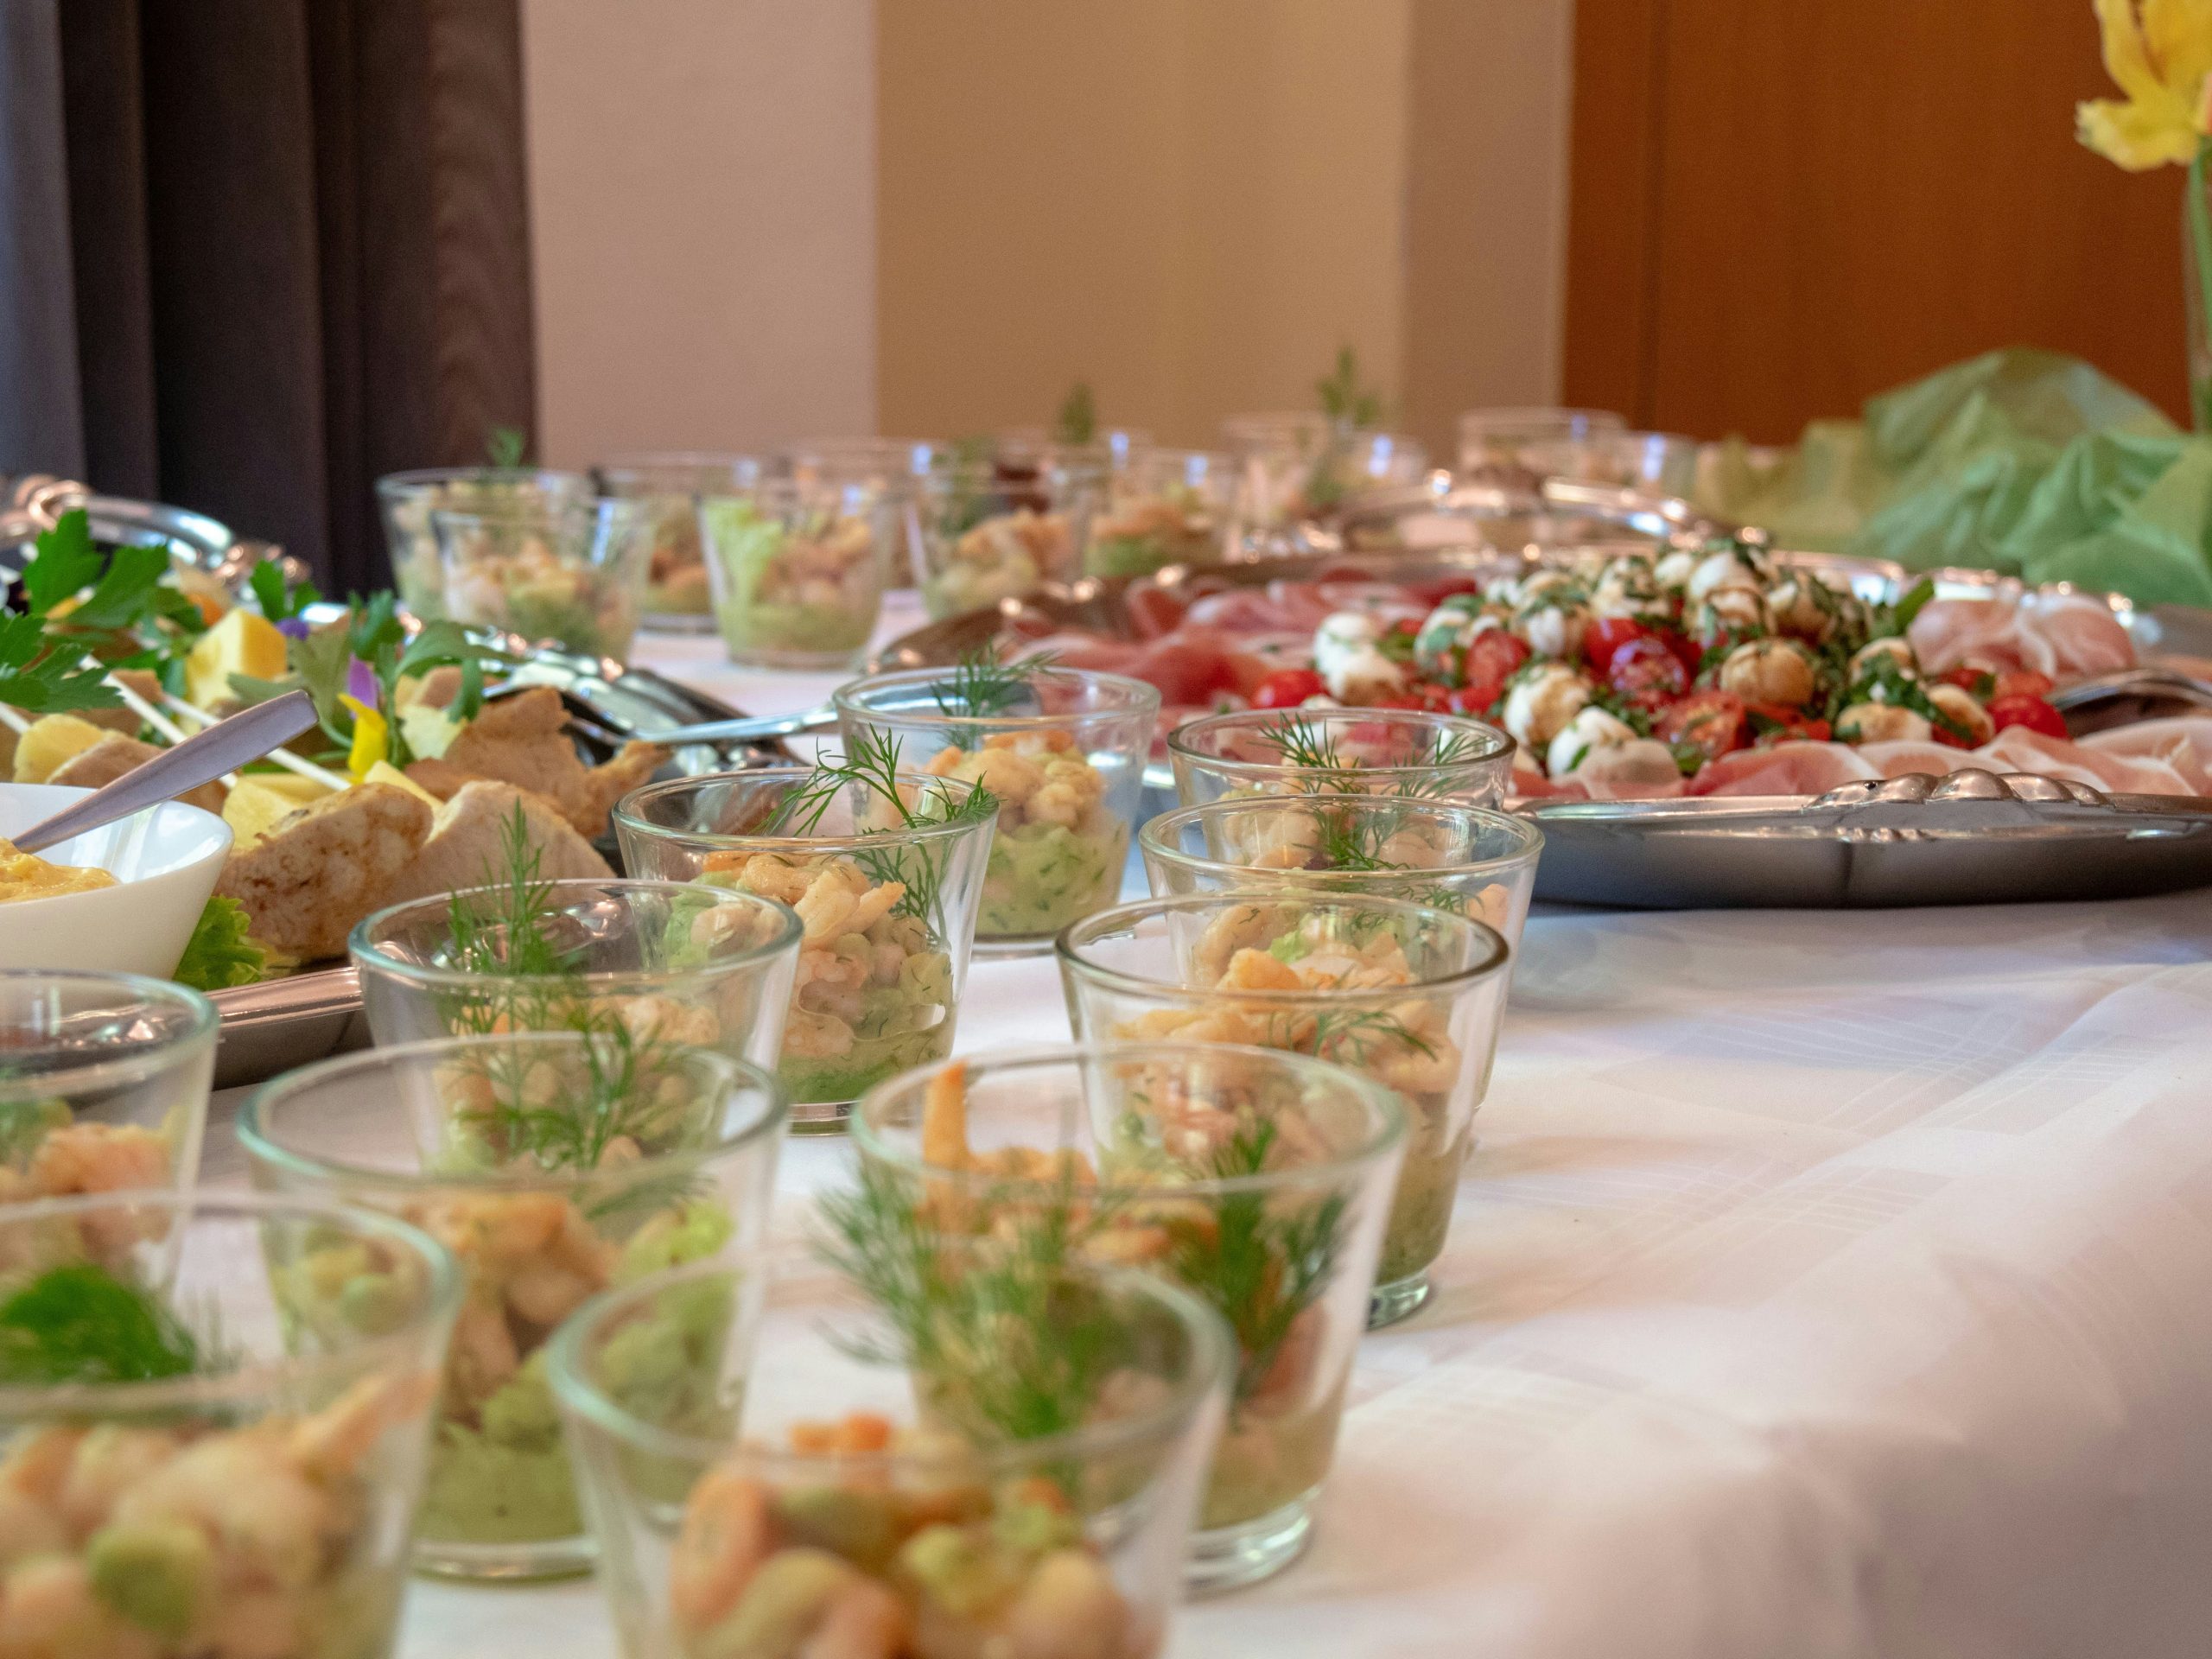 explore creative ideas for buffet styling and presentation to make your next event or gathering a memorable experience.